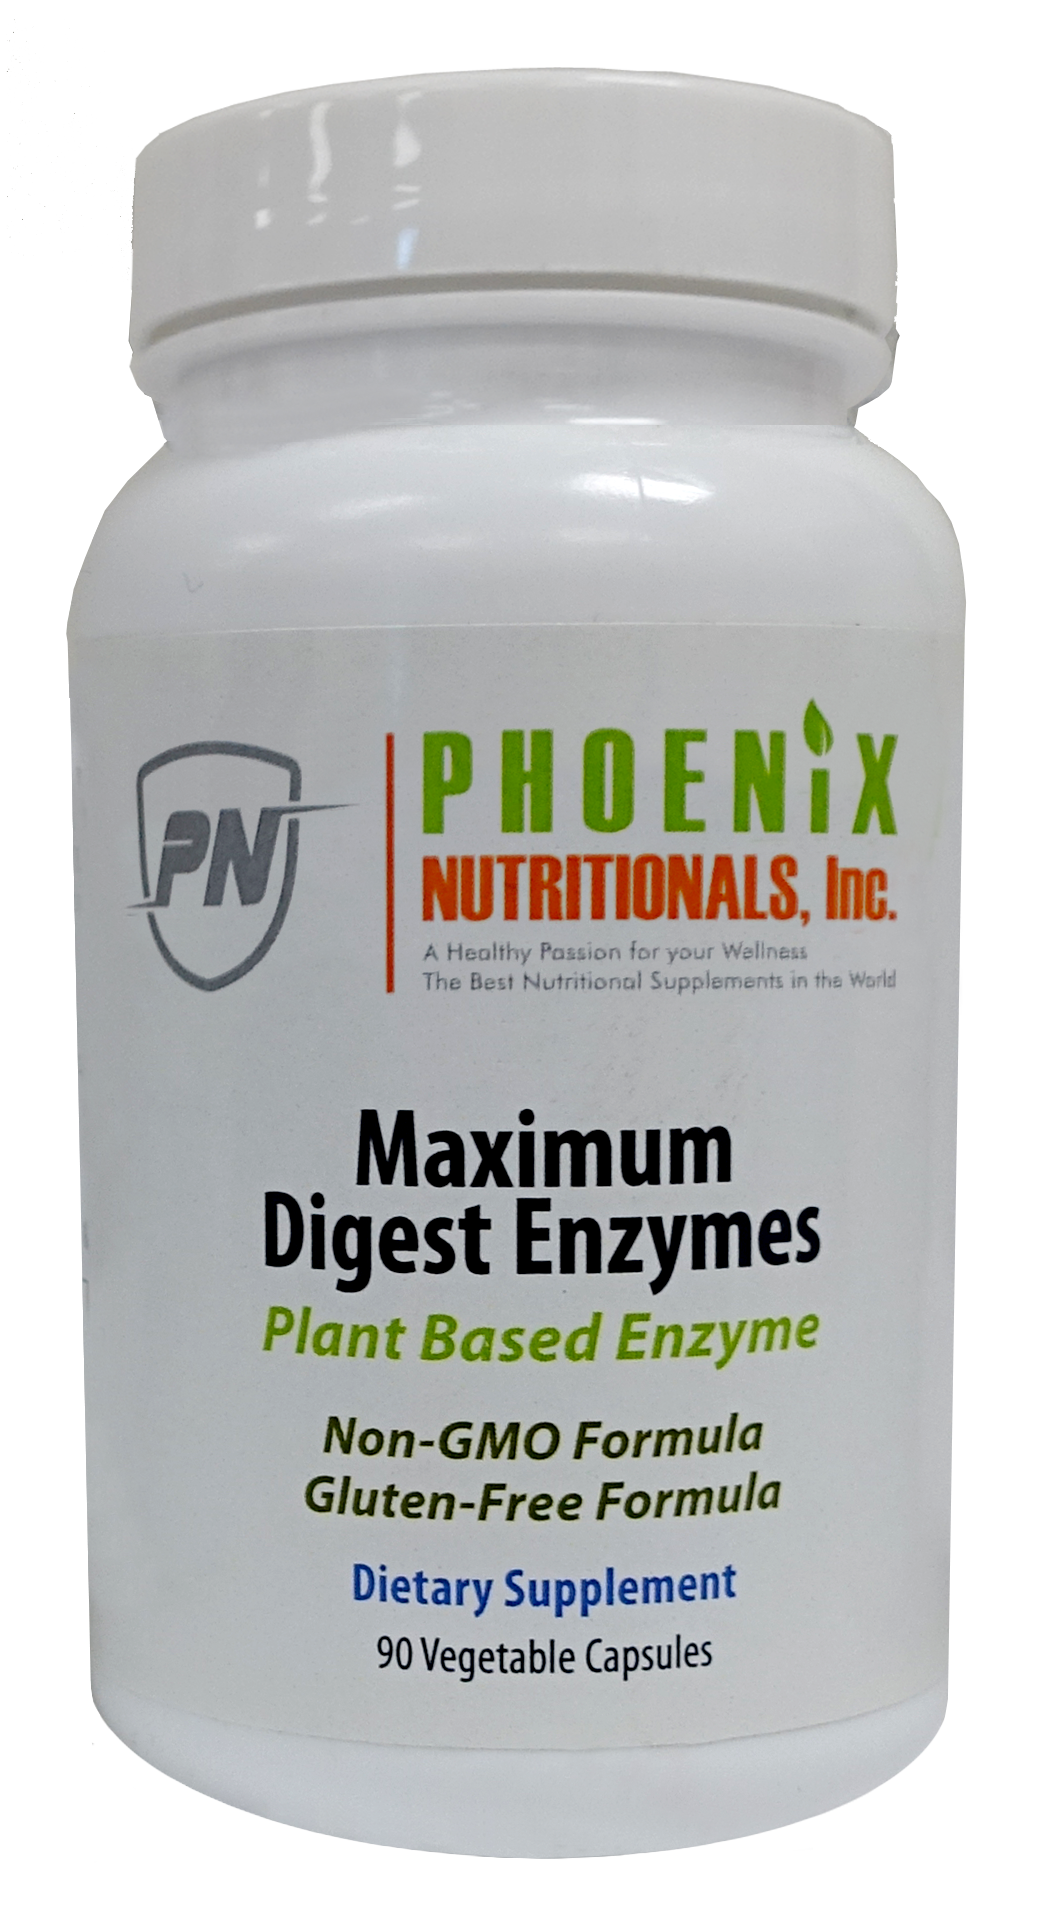 Max Enzyme. Enzymes - Phoenix. Digestive Enzymes. Sam nutritional products Selenium слон. Plant enzymes